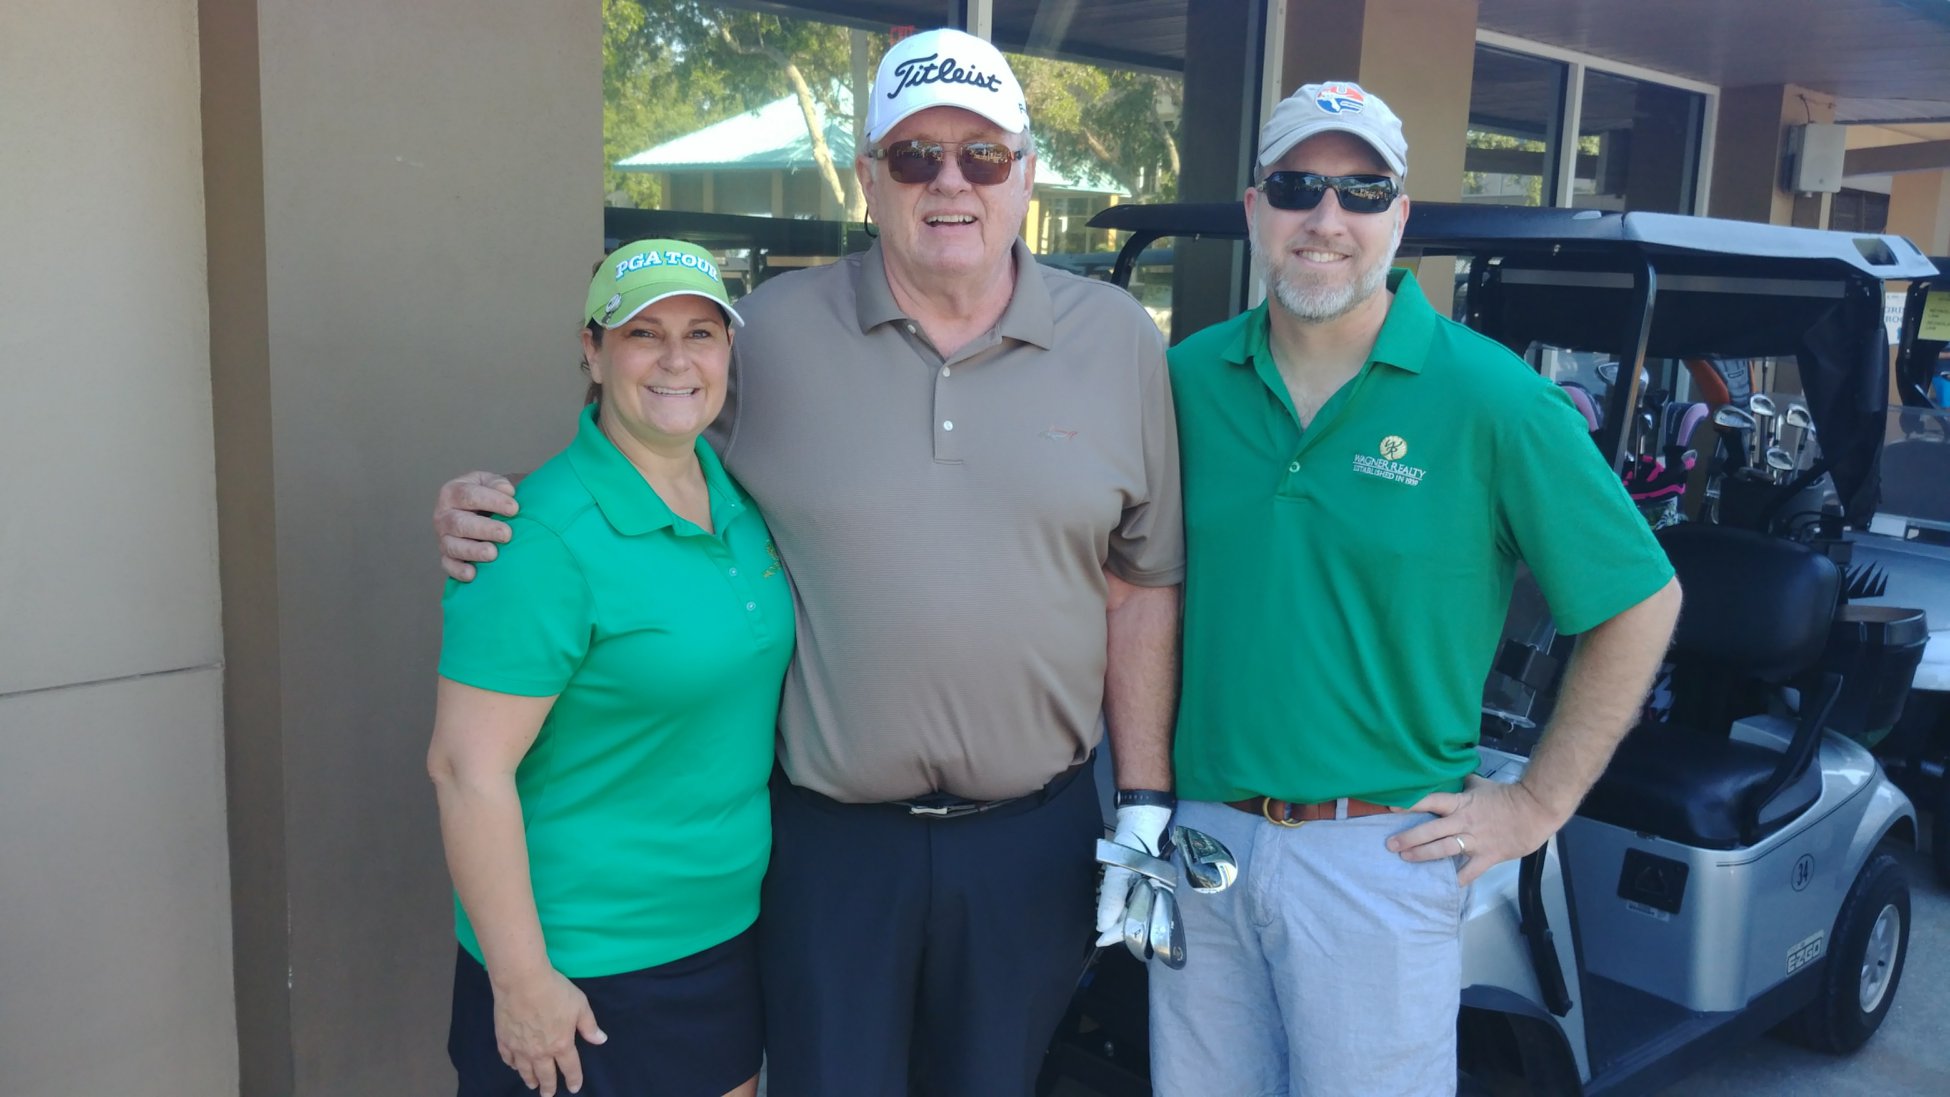 Fred Moore enjoyed supporting the Manatee High School Lacrosse Booster Club golf tournament